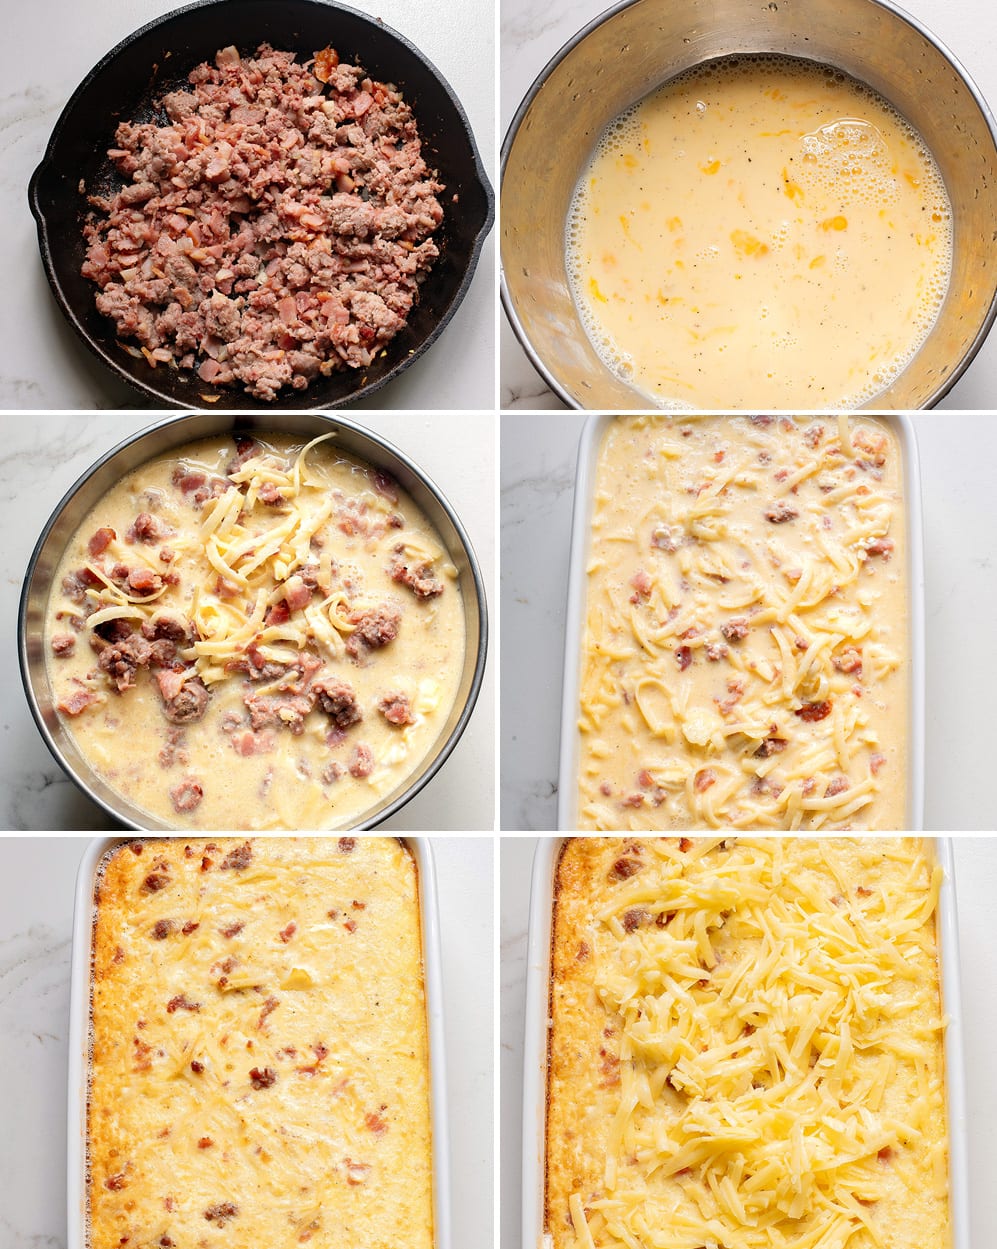 How to make Amish Breakfast Casserole